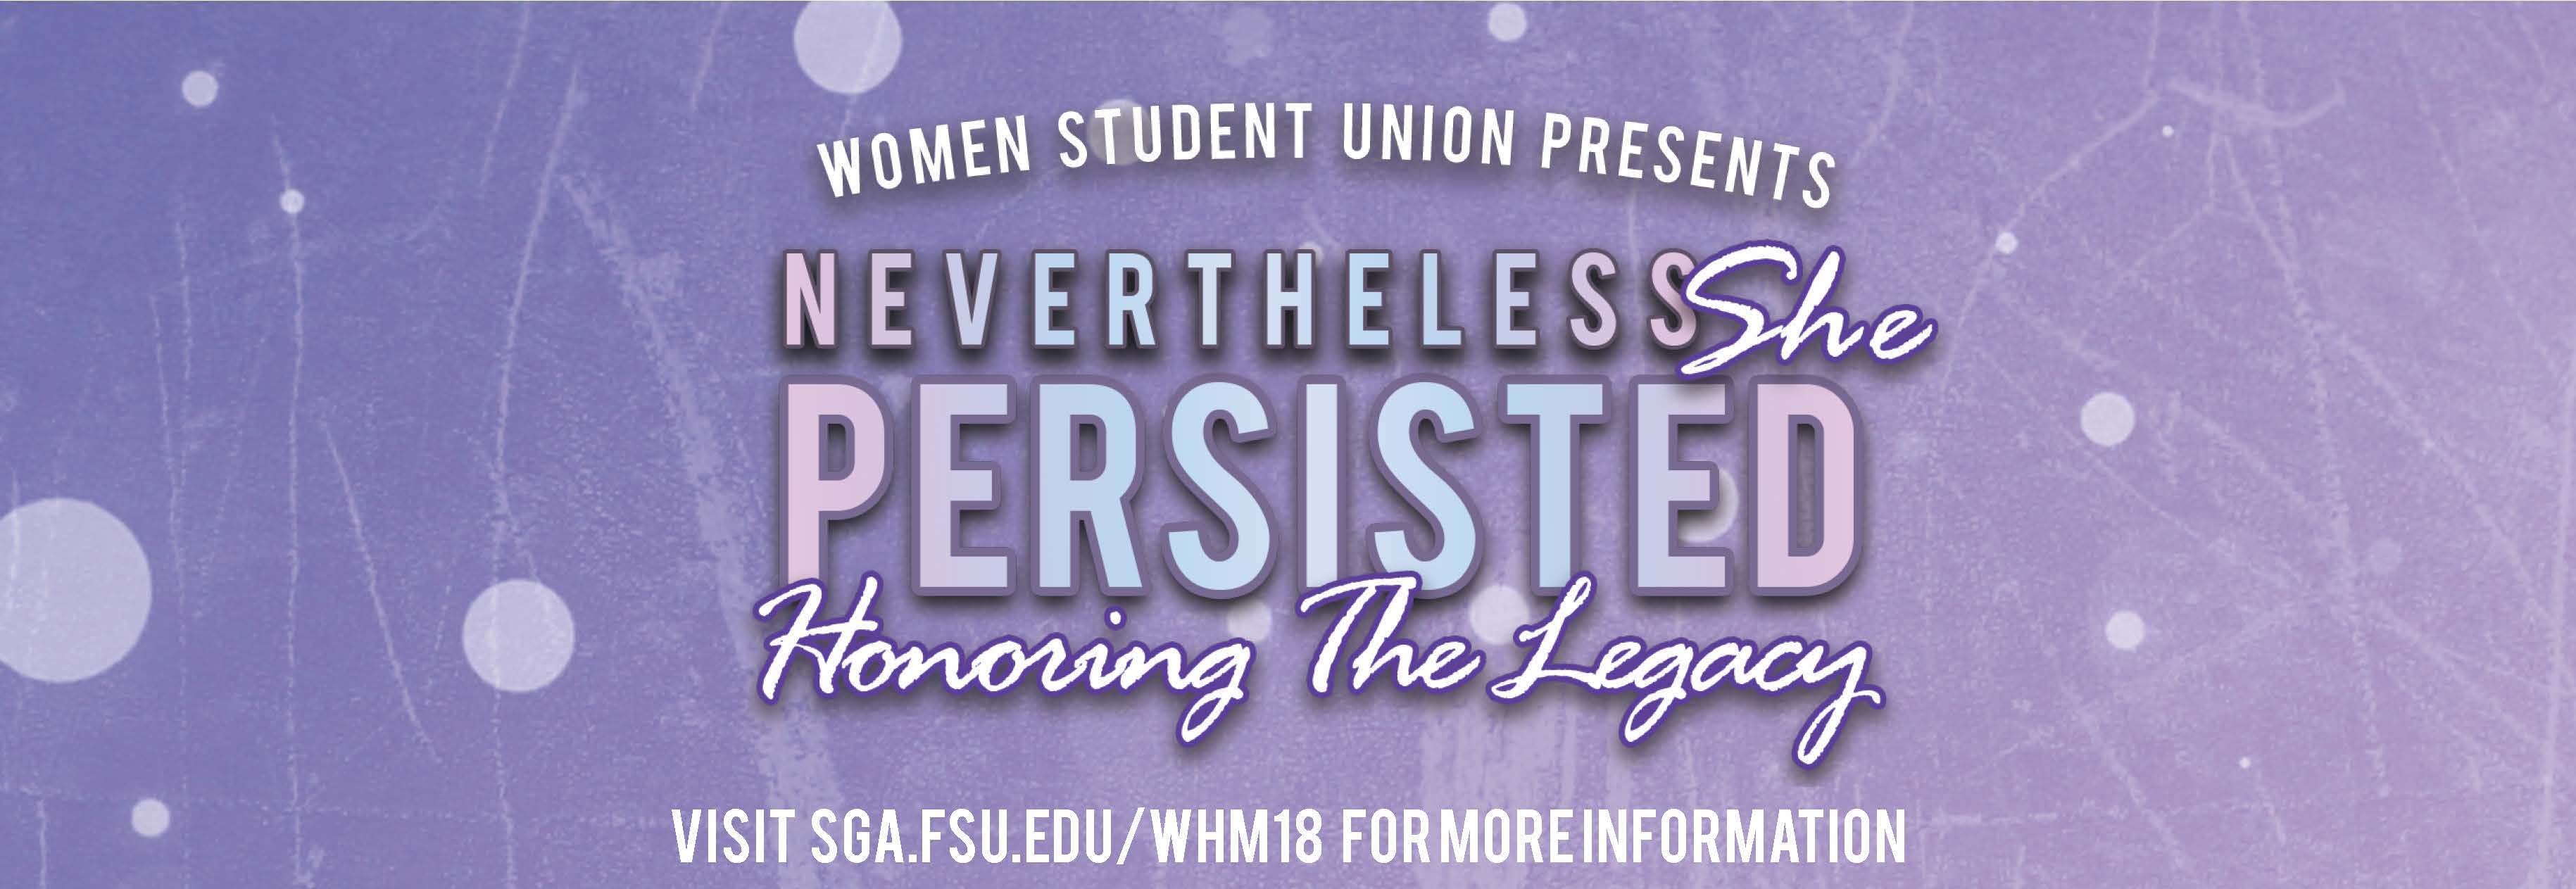 Women Student Union presents Nevertheless She Persisted, Honoring the Legacy